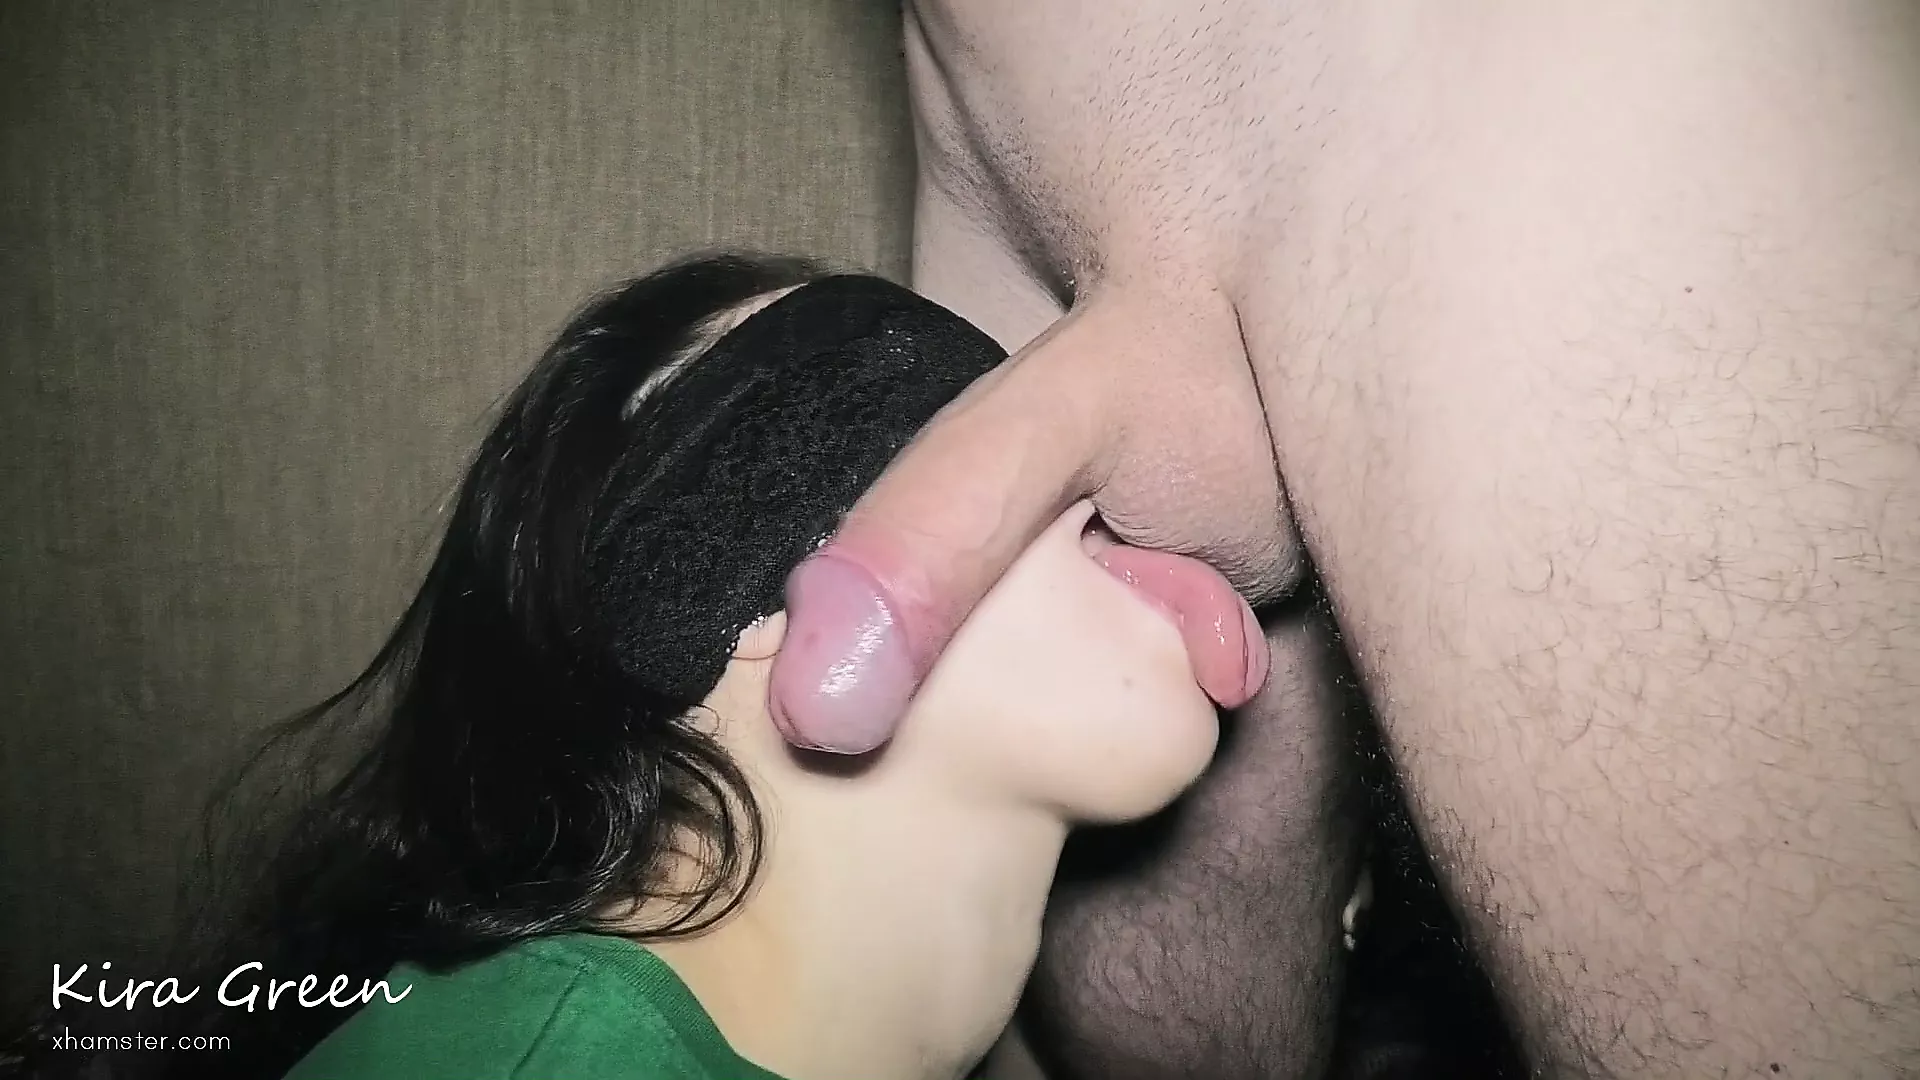 Blowjob and Rimming, licking and sucking balls, threesome pic